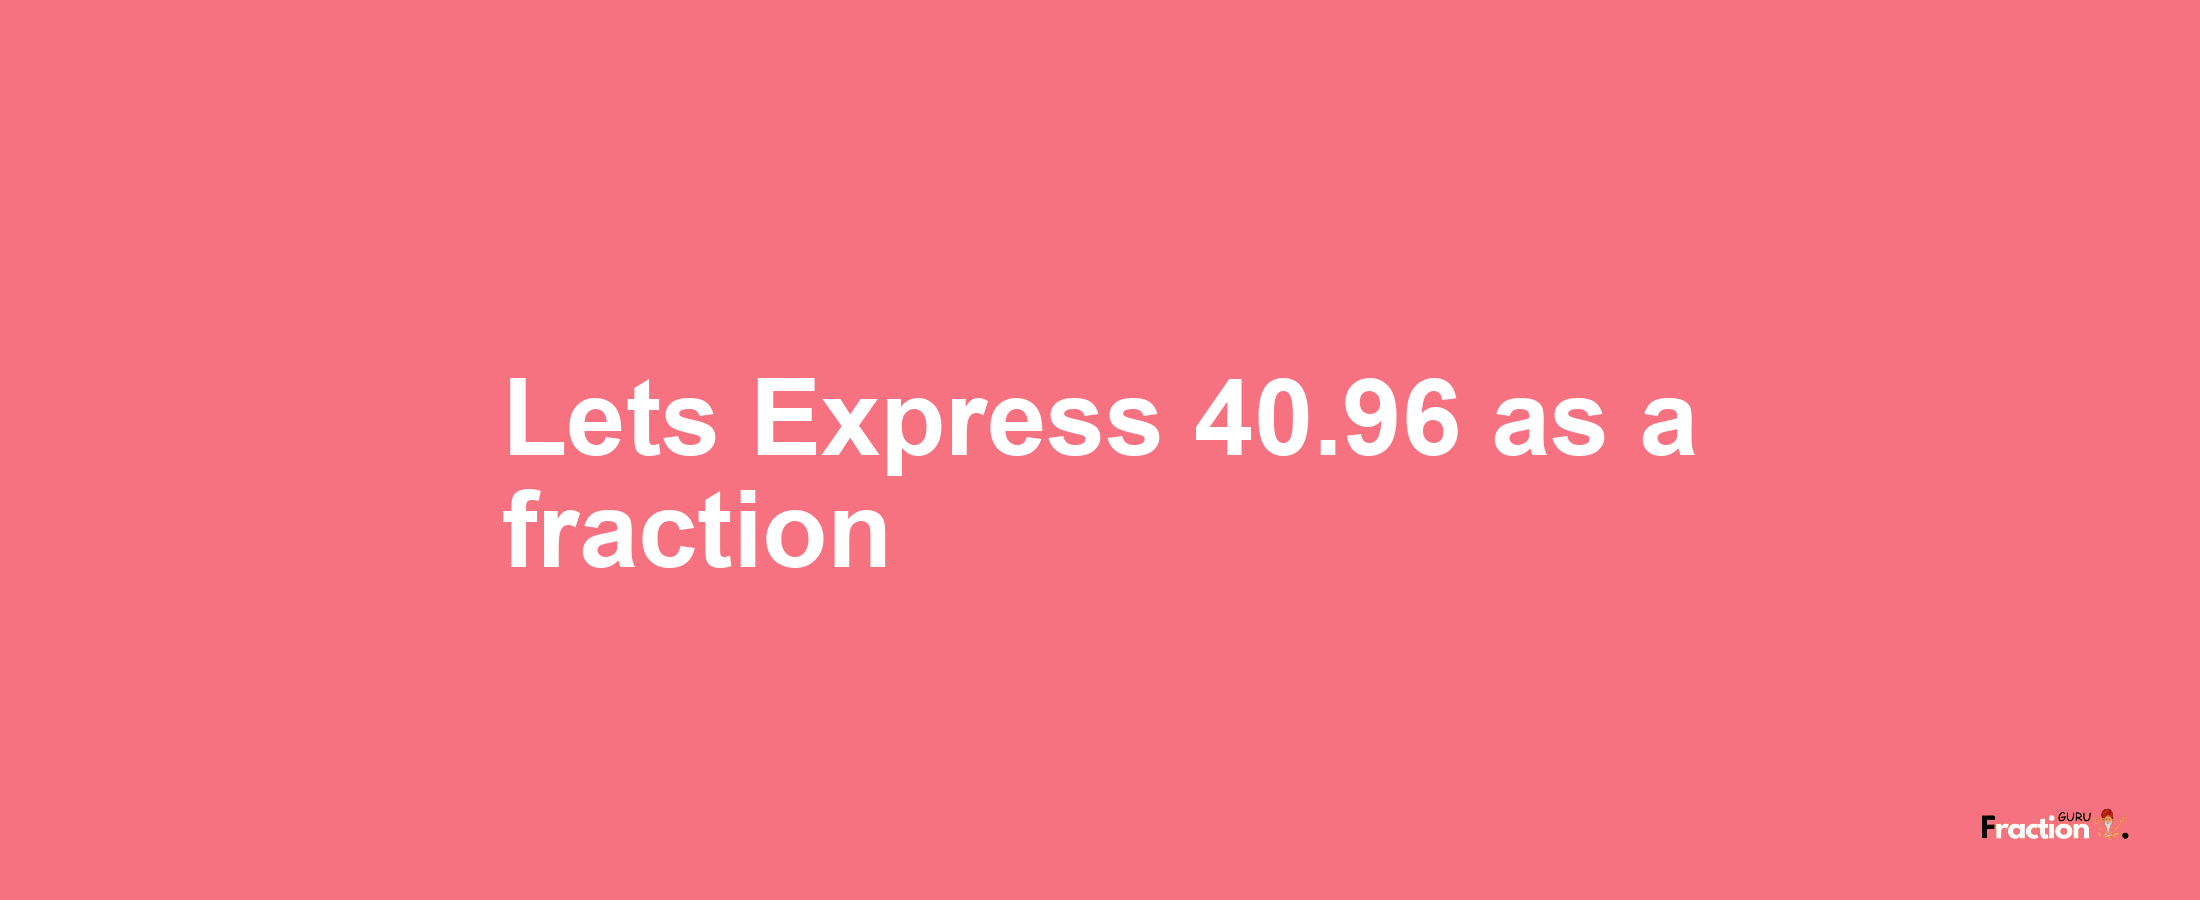 Lets Express 40.96 as afraction